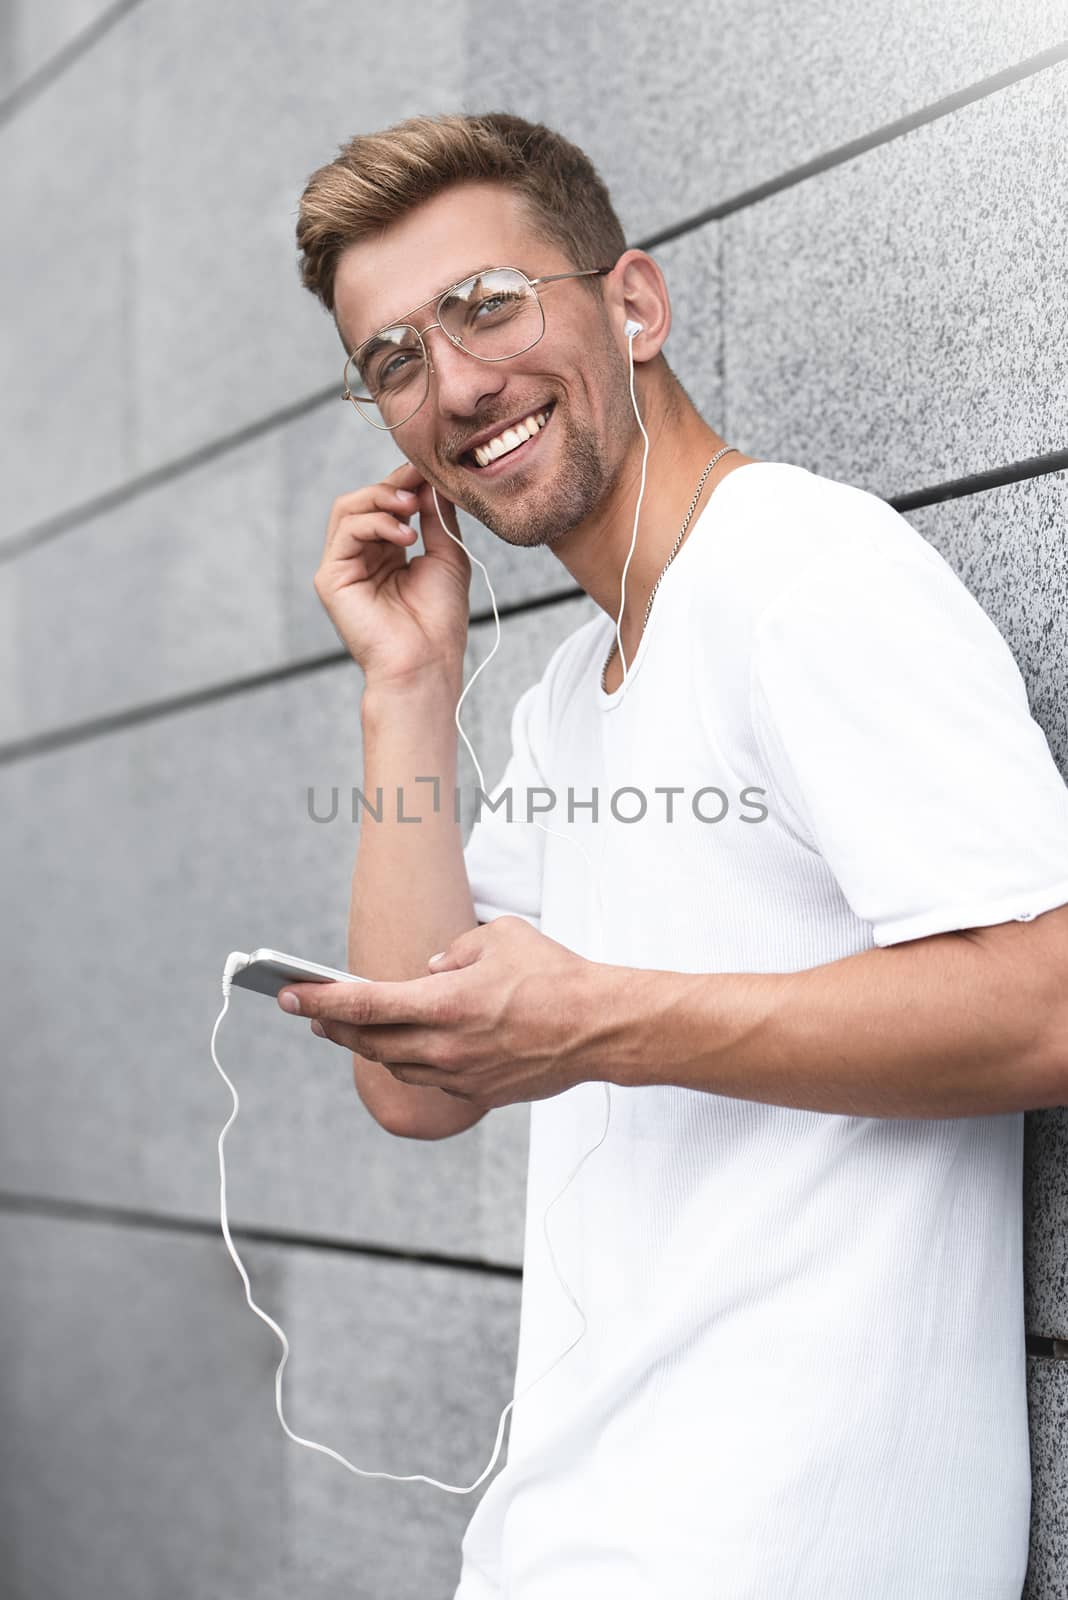 Earphones concept. People, technology, travel and tourism - man with earphones, smartphone on city street and listening to music over gray wall background